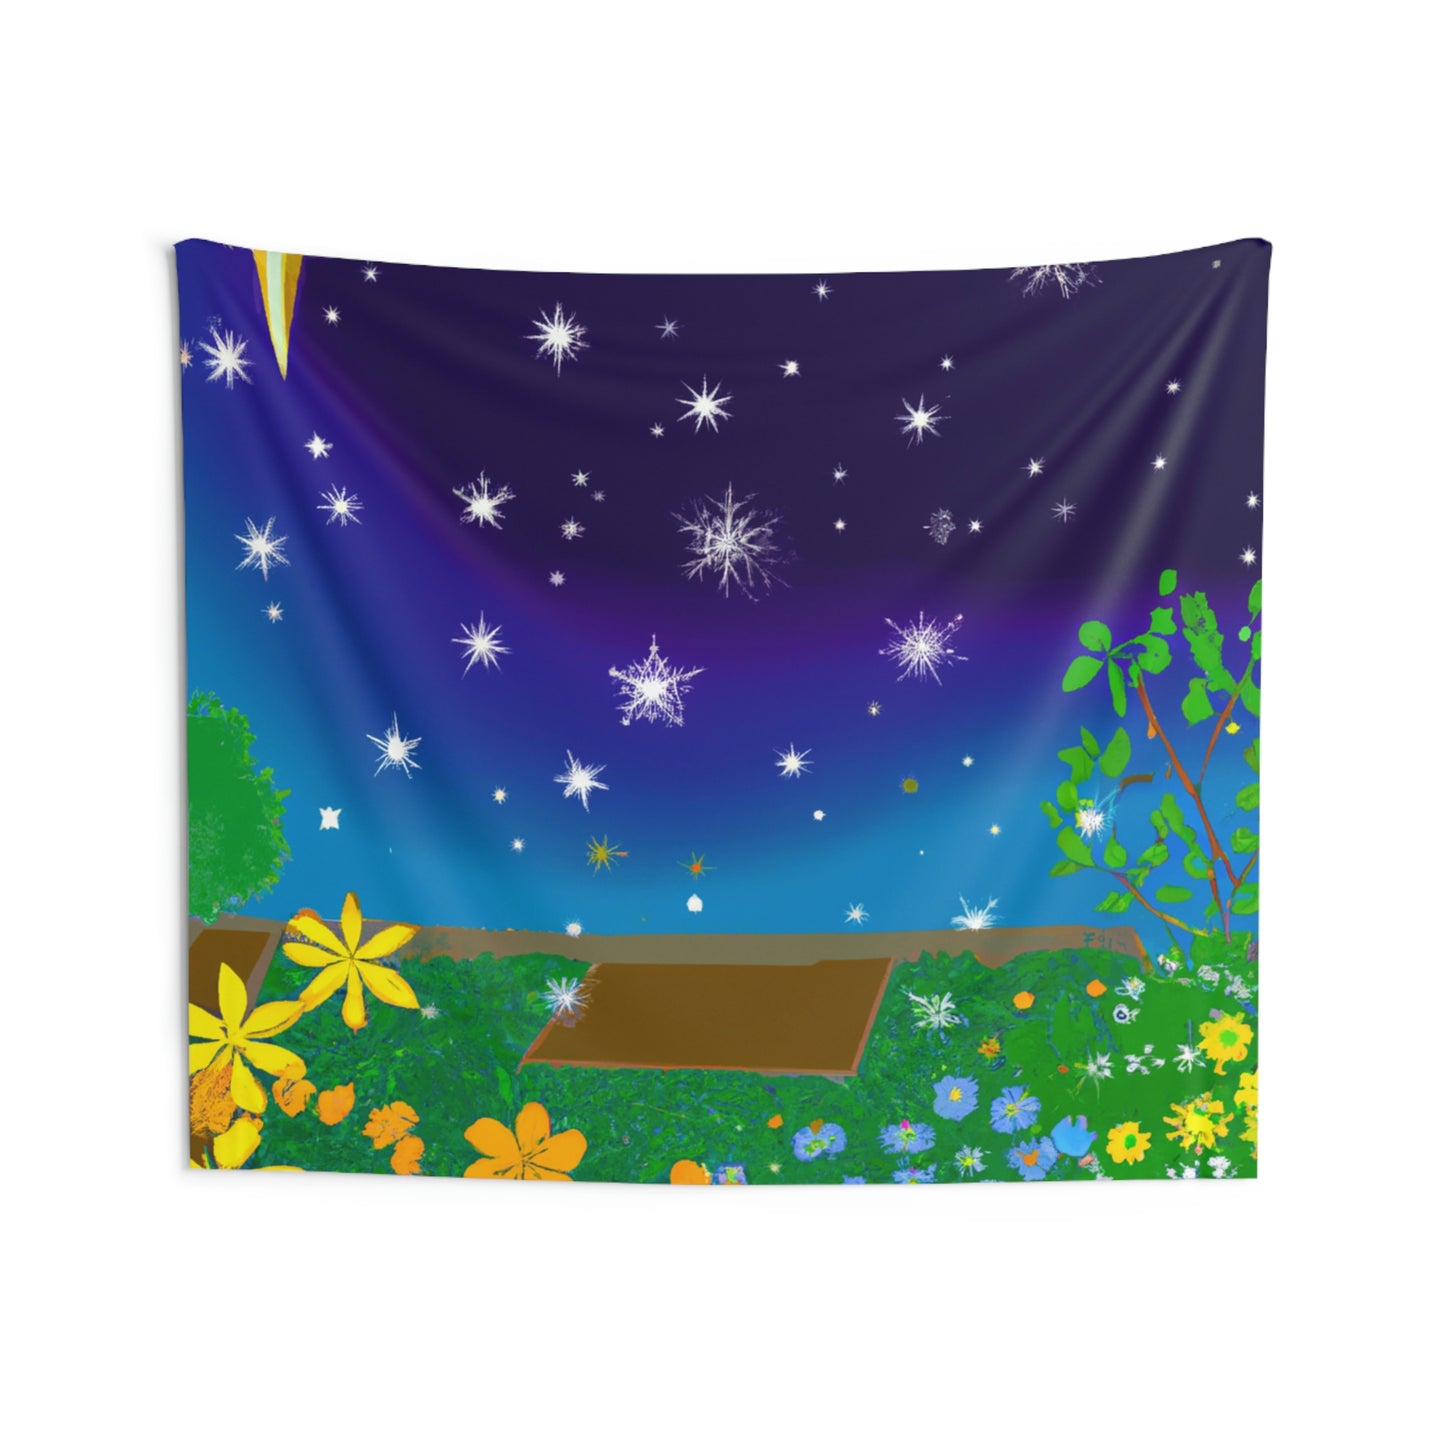 "A Celestial Garden of Color" - The Alien Wall Tapestries